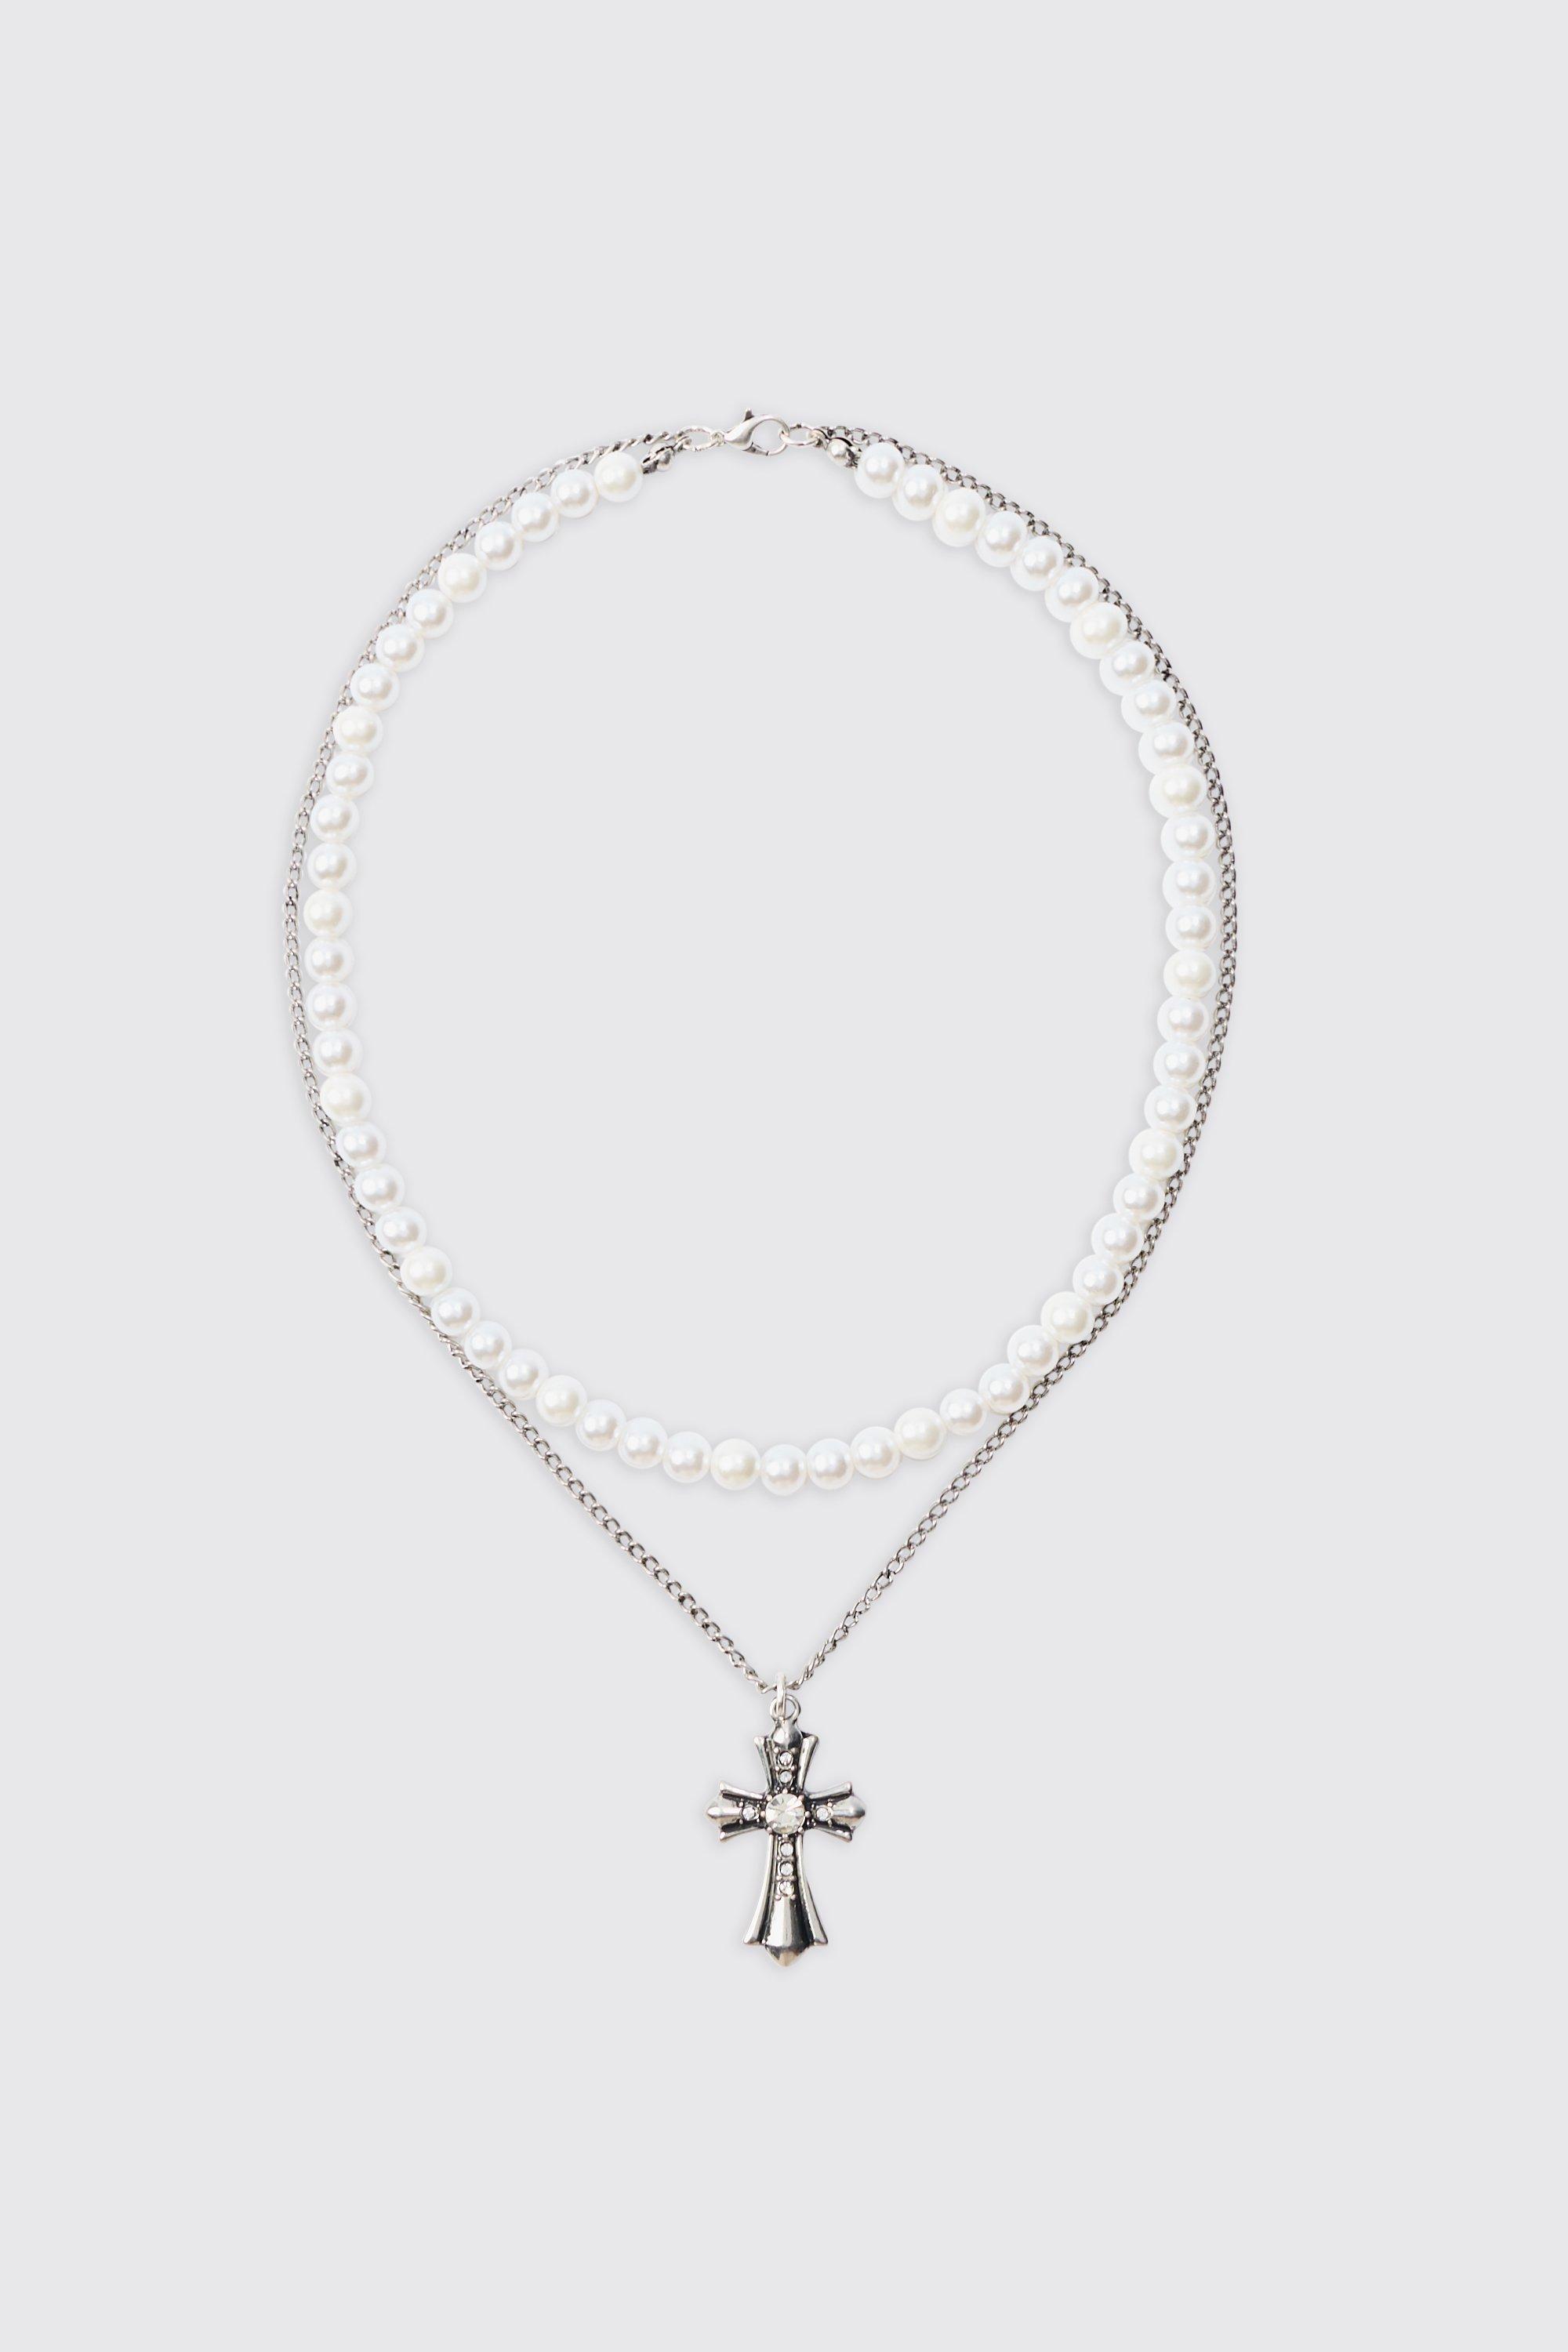 Image of Pearl & Chain Necklace With Cross Pendant In Silver, Grigio